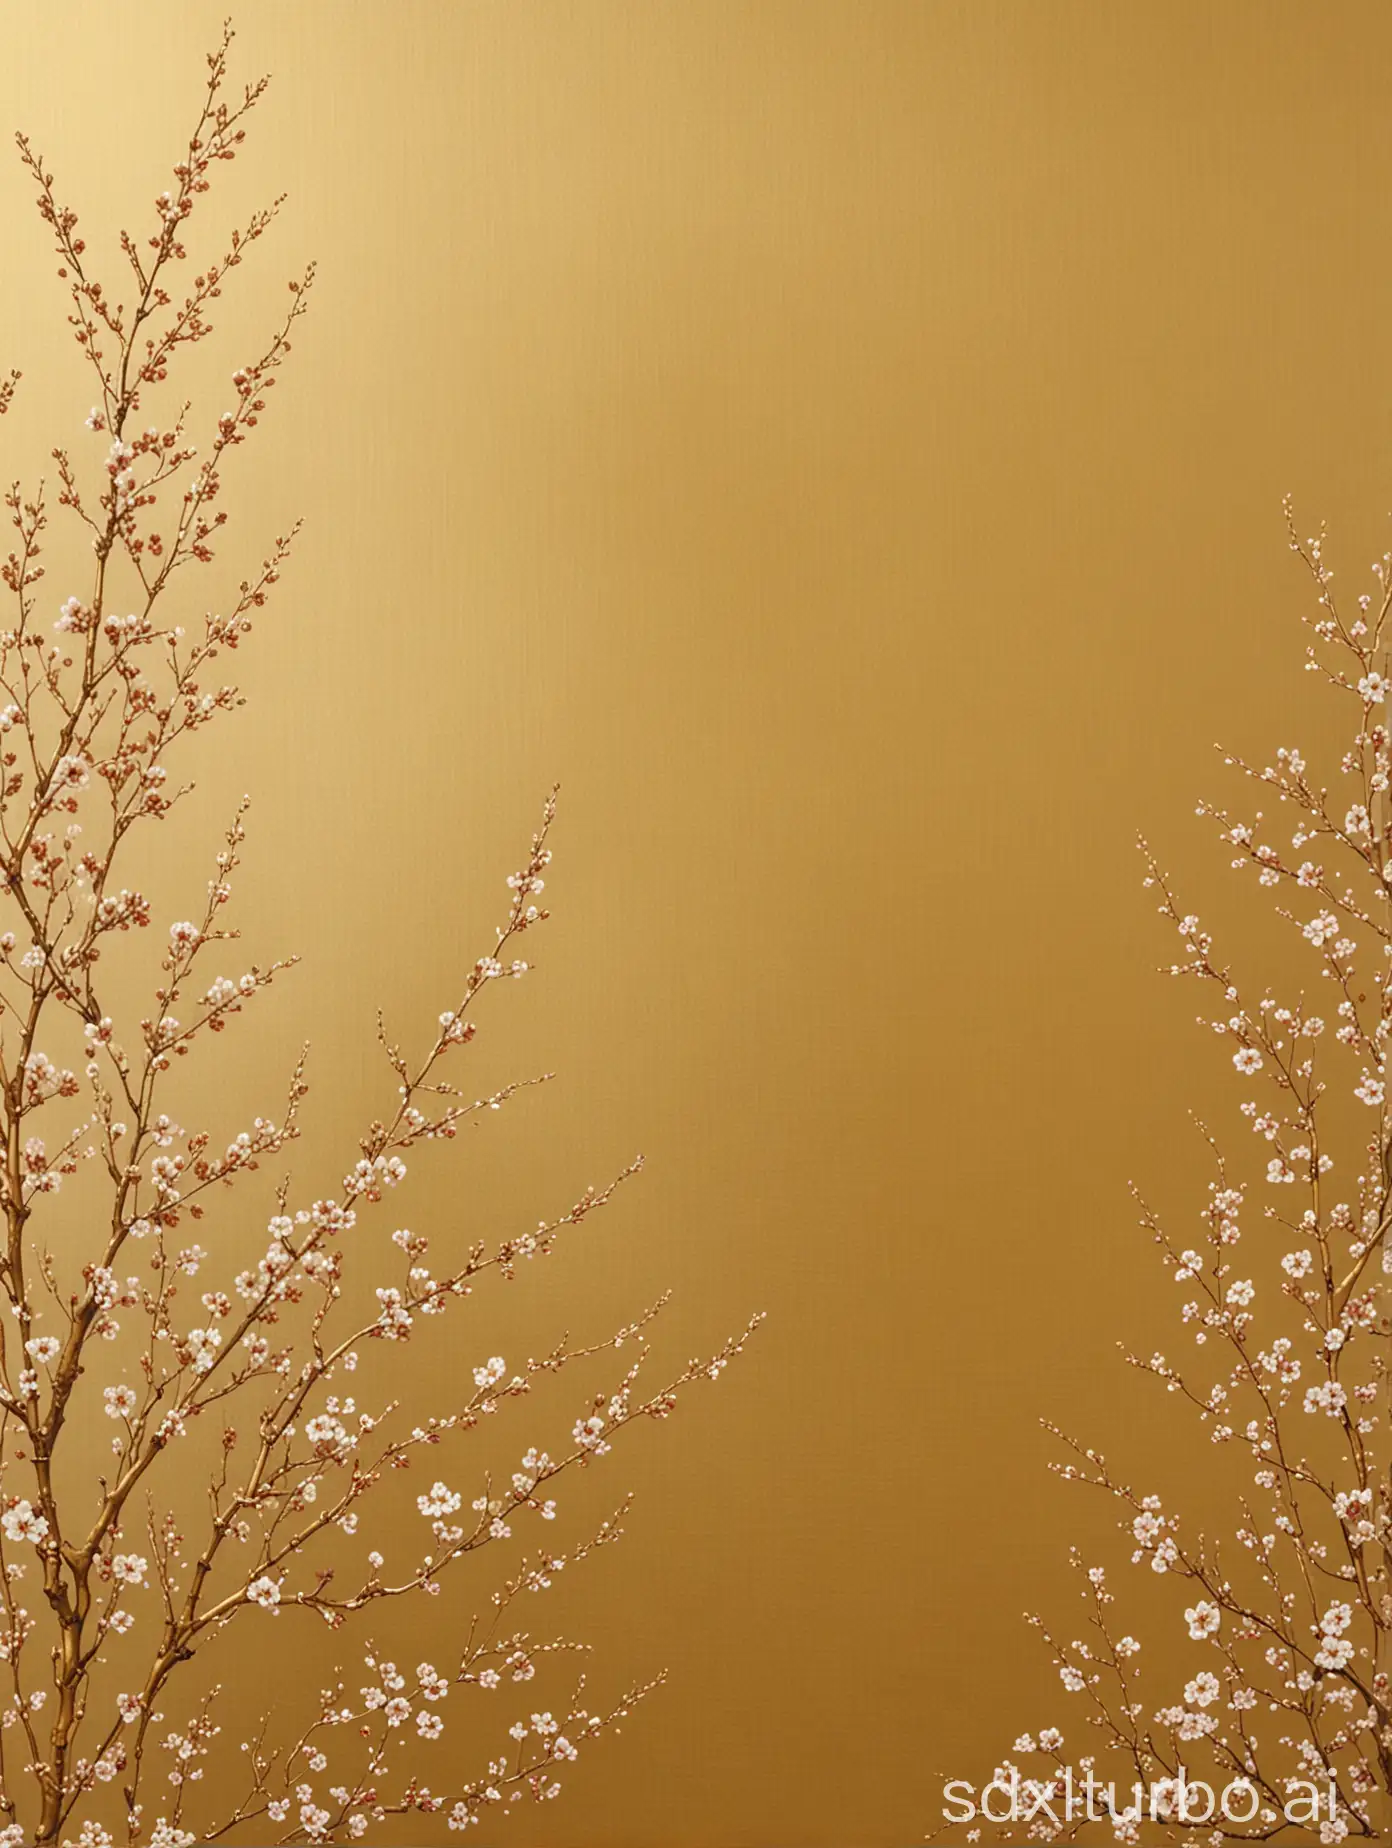 Beautiful wallpaper, golden texture brushed horizontally with small plum blossoms.